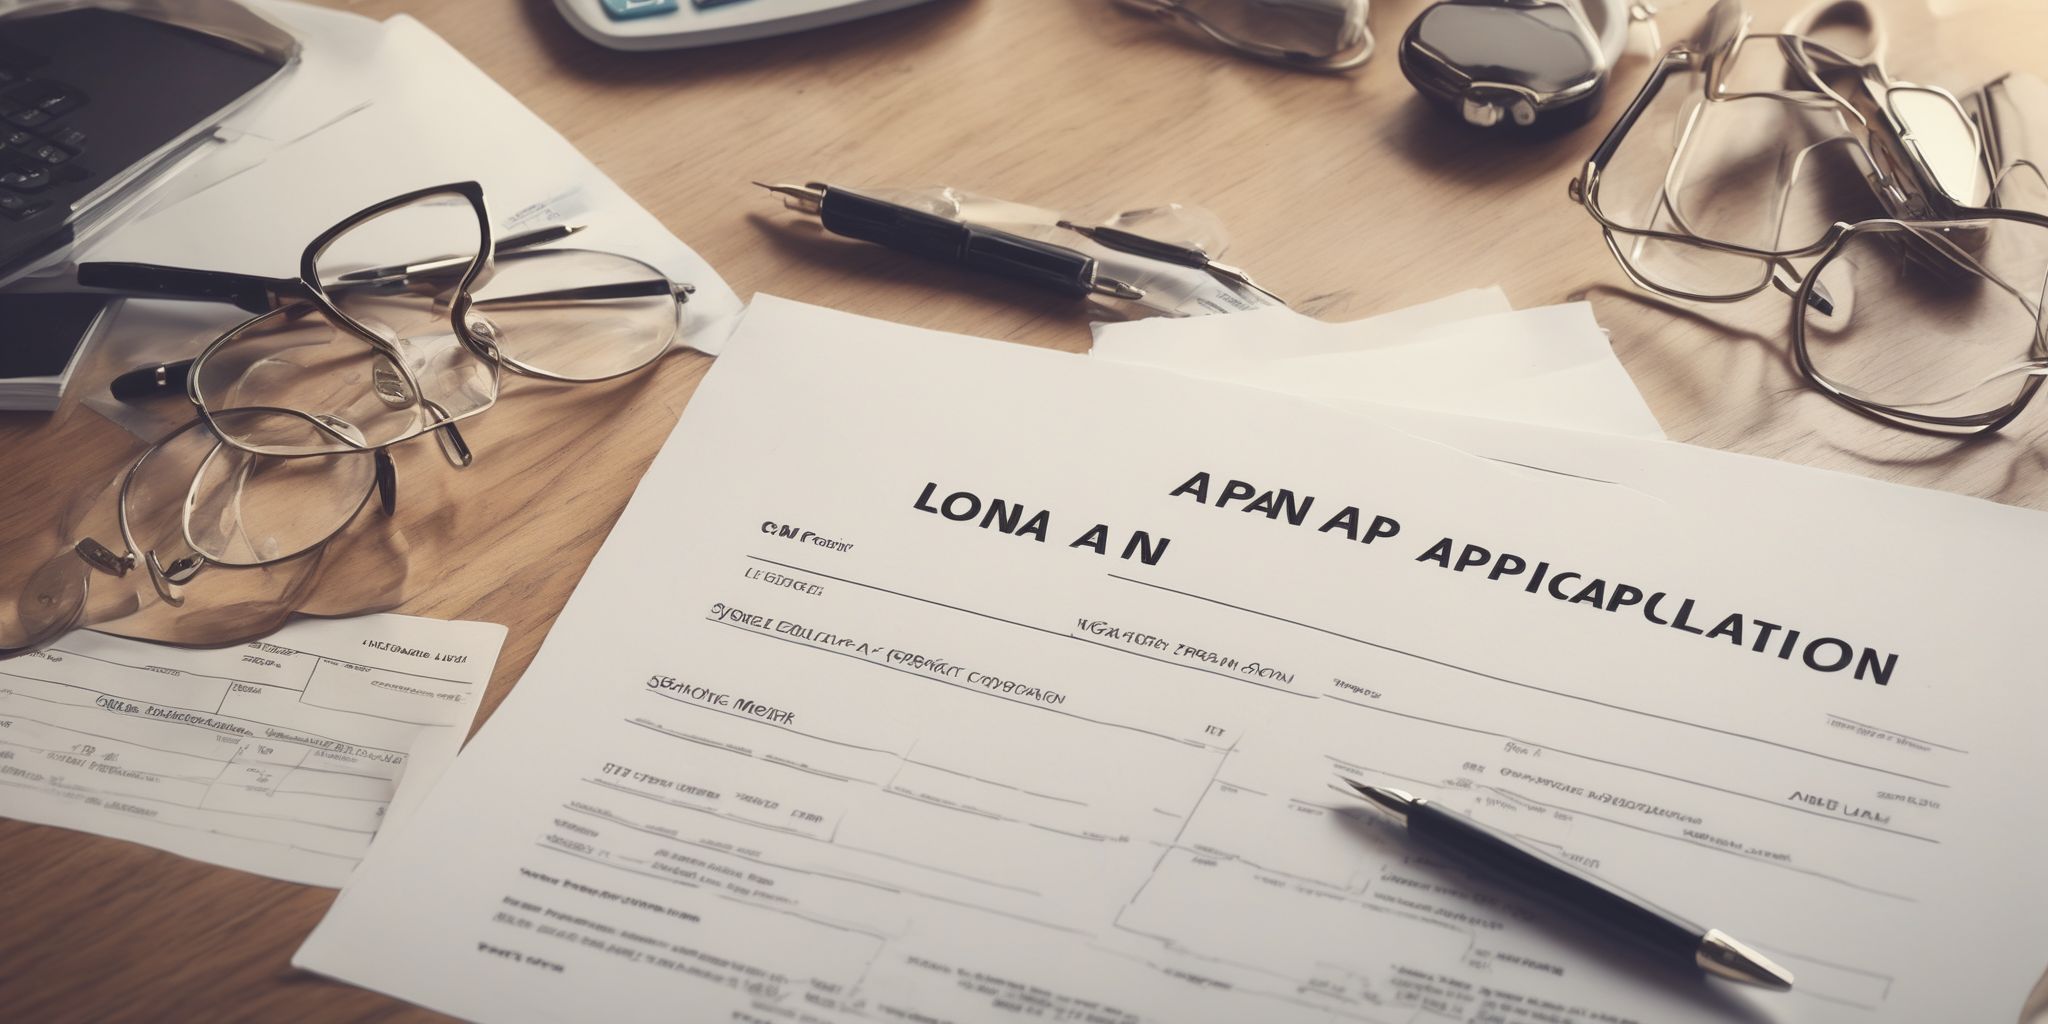 Loan application  in realistic, photographic style